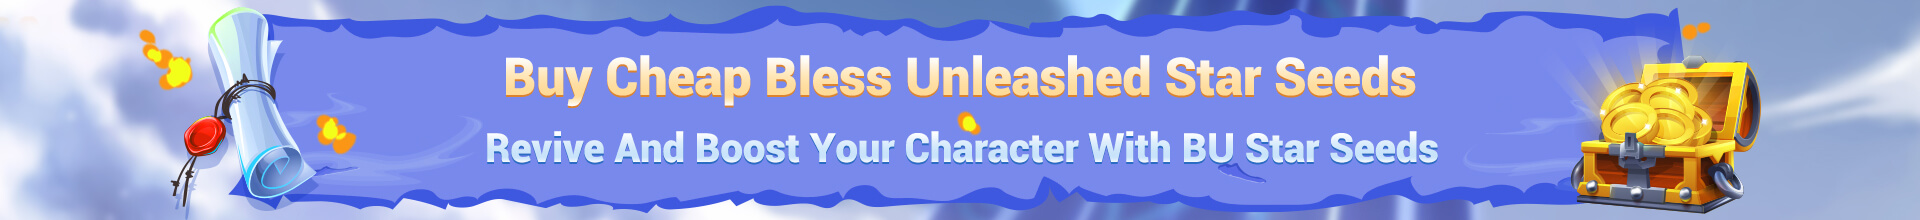 Bless Unleashed starseeds banner